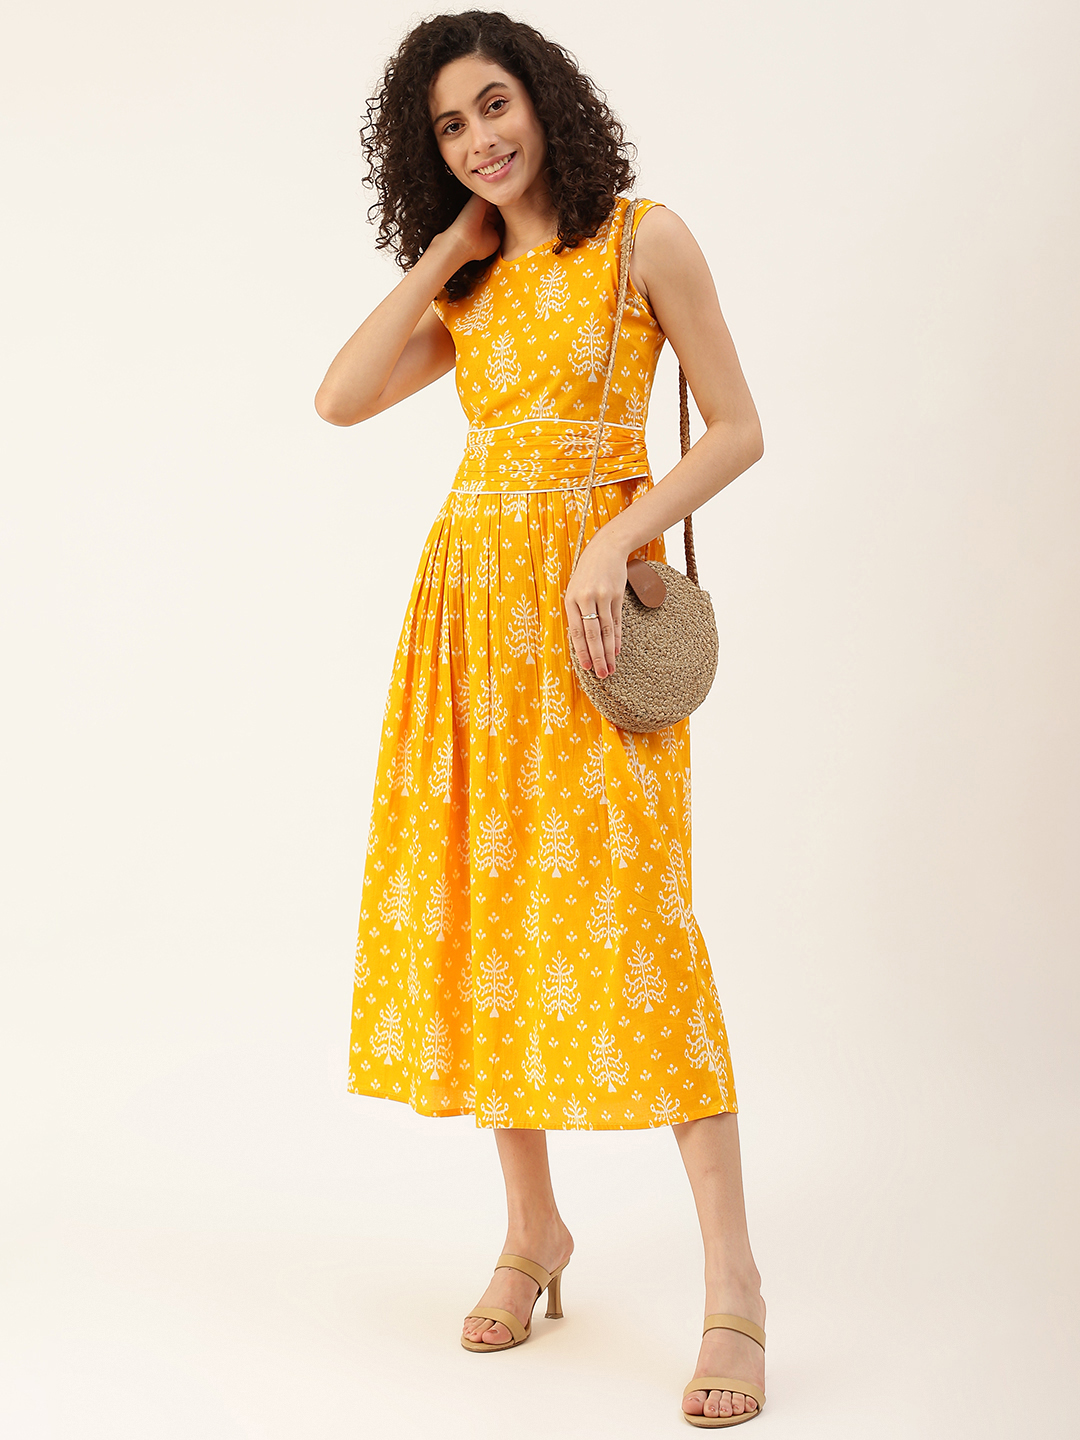 Cotton Printed dress for women 